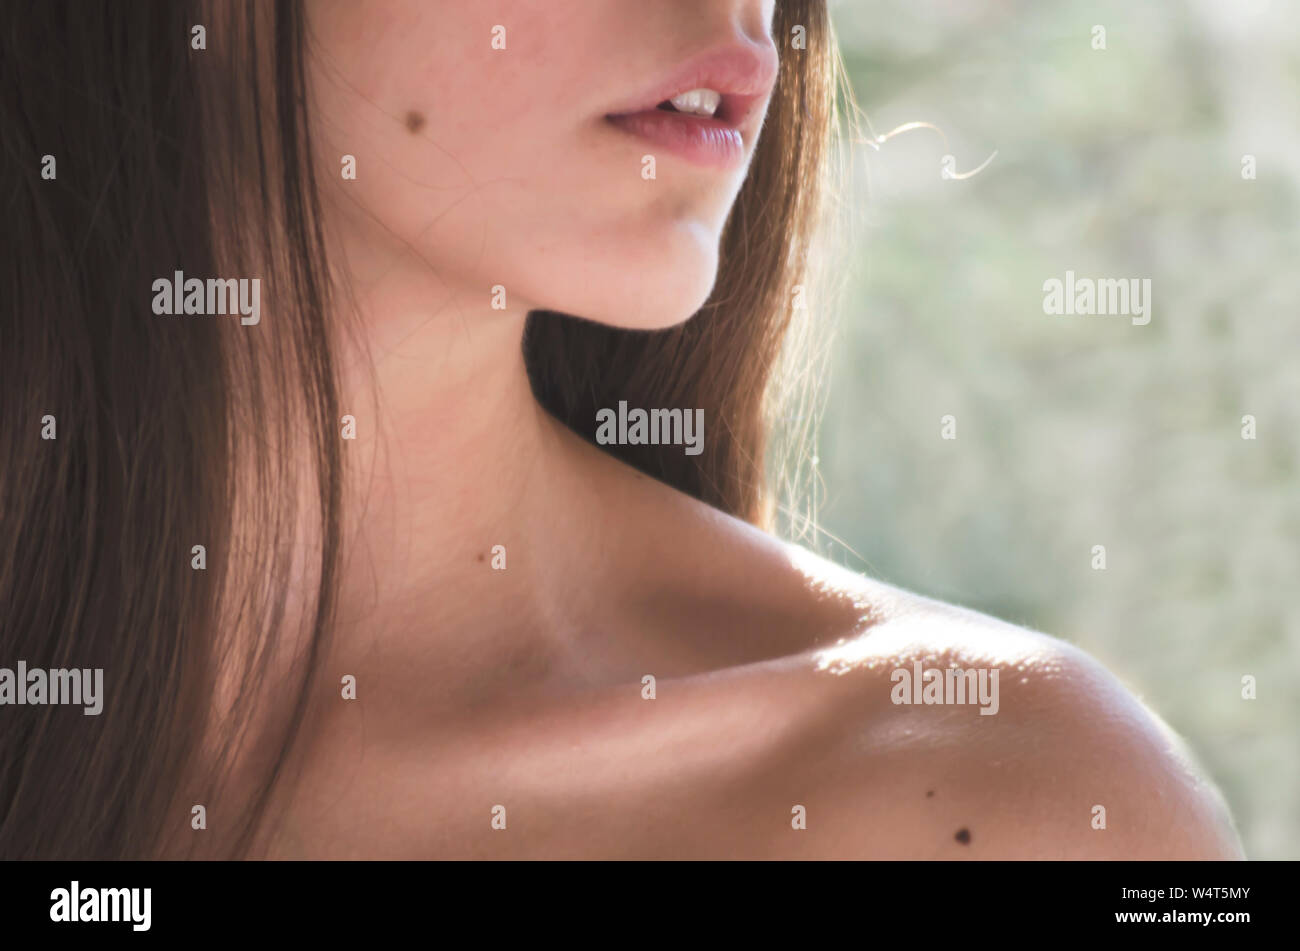 Close-up of a teenage girl's shoulder, neck and chin Stock Photo